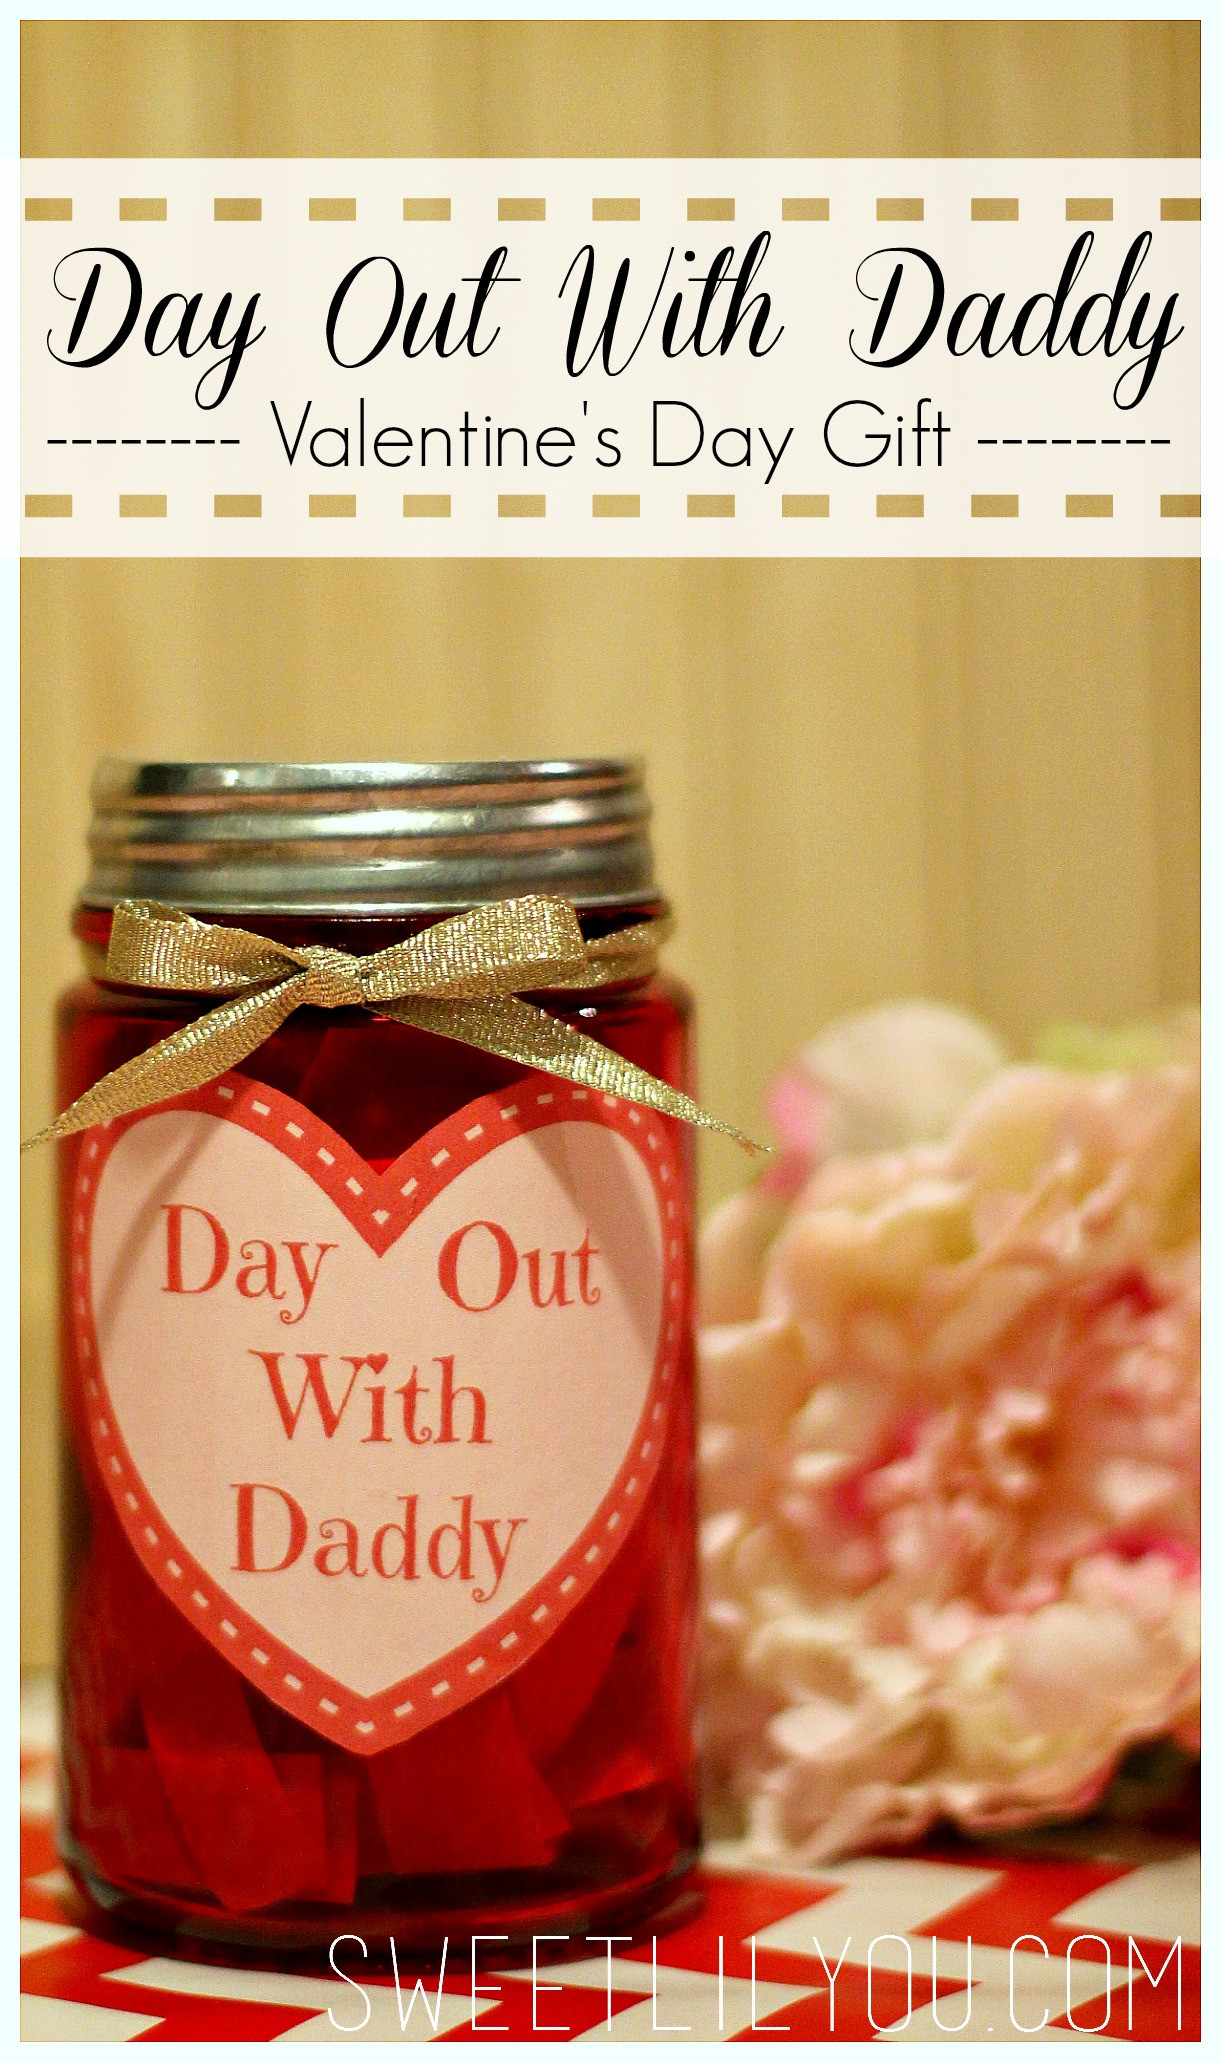 Valentines Day Gifts For Daddy
 Day Out With Daddy Jar Valentine s Day Gift for Dad